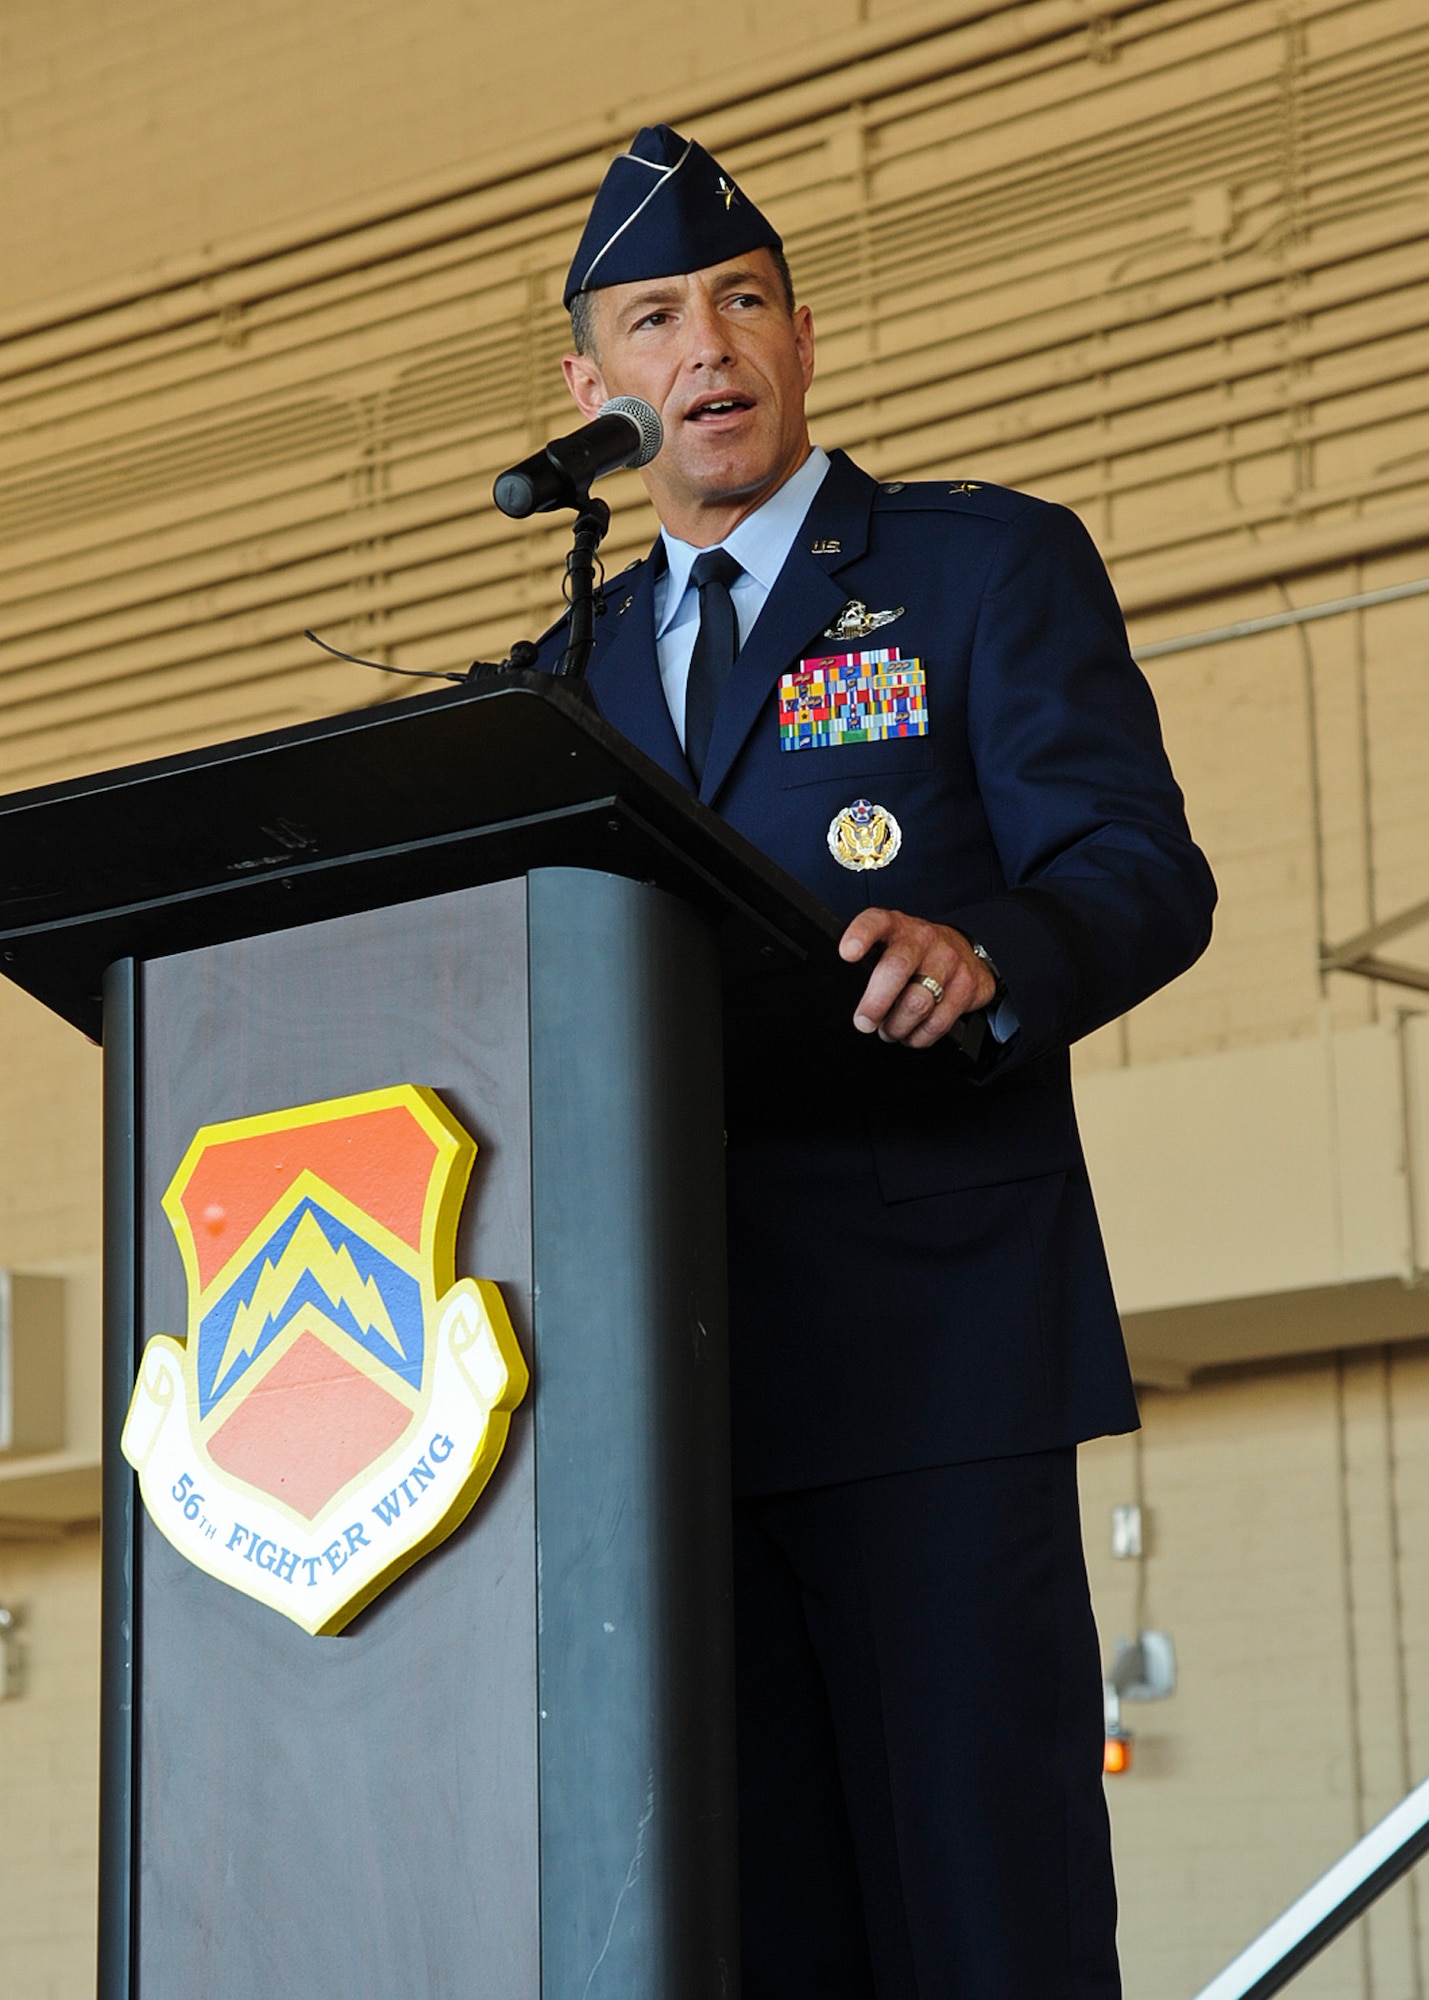 Brig. Gen. Scott Pleus, 56th Fighter Wing commander, speaks to the audience after assuming command of the wing at a ceremony on Luke Air Force Base on June 20. The general is accompanied at Luke by his wife, Jennifer, and their two sons and daughter: Jared, 16; Jack, 11; and Jamie, 14. “Luke is a family, and Jennifer and I are proud to be part of it,” he said. (U.S. Air Force photo/Staff Sgt. Darlene Setlmann)